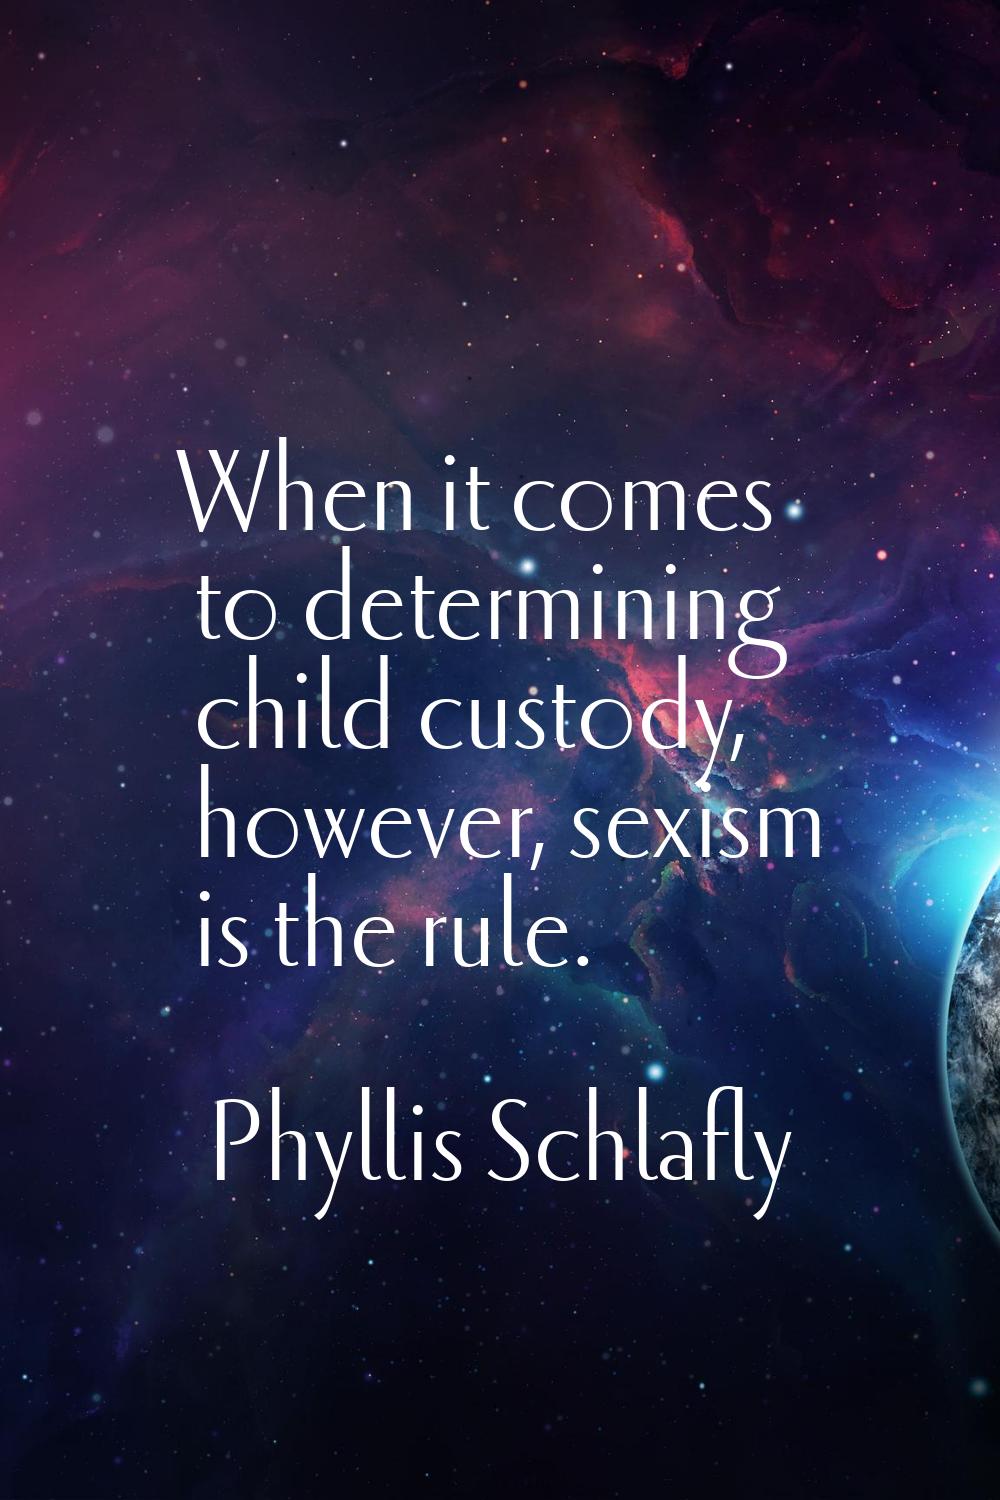 When it comes to determining child custody, however, sexism is the rule.